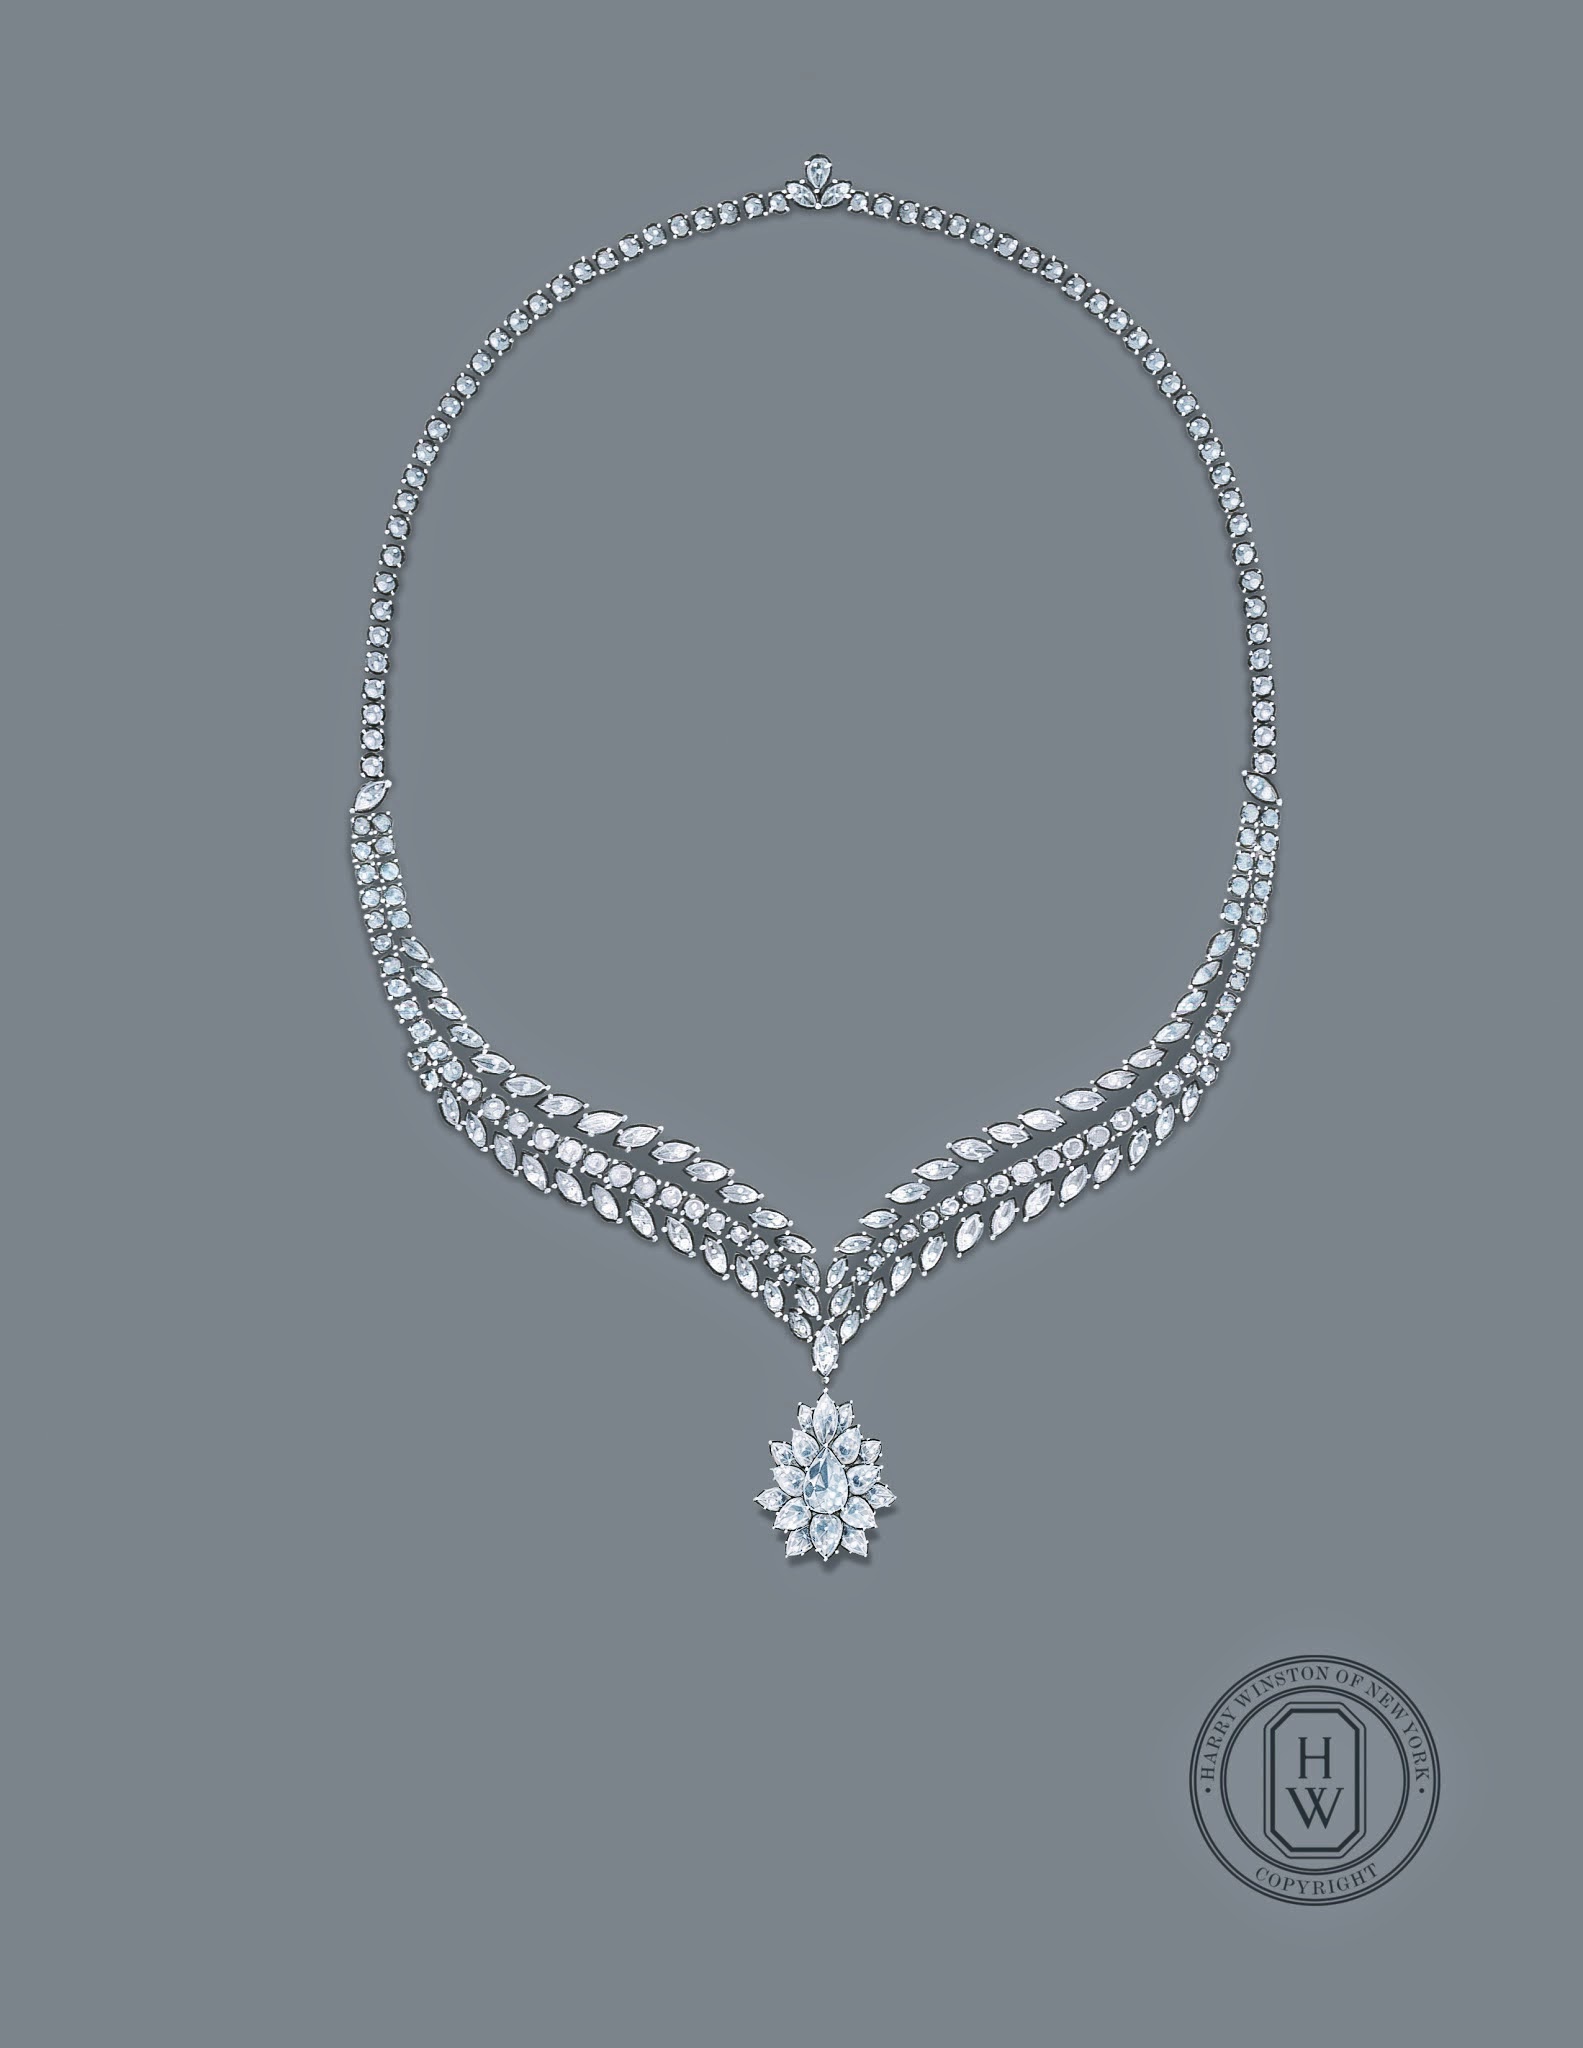 The Epic Cluster necklace by Harry Winston